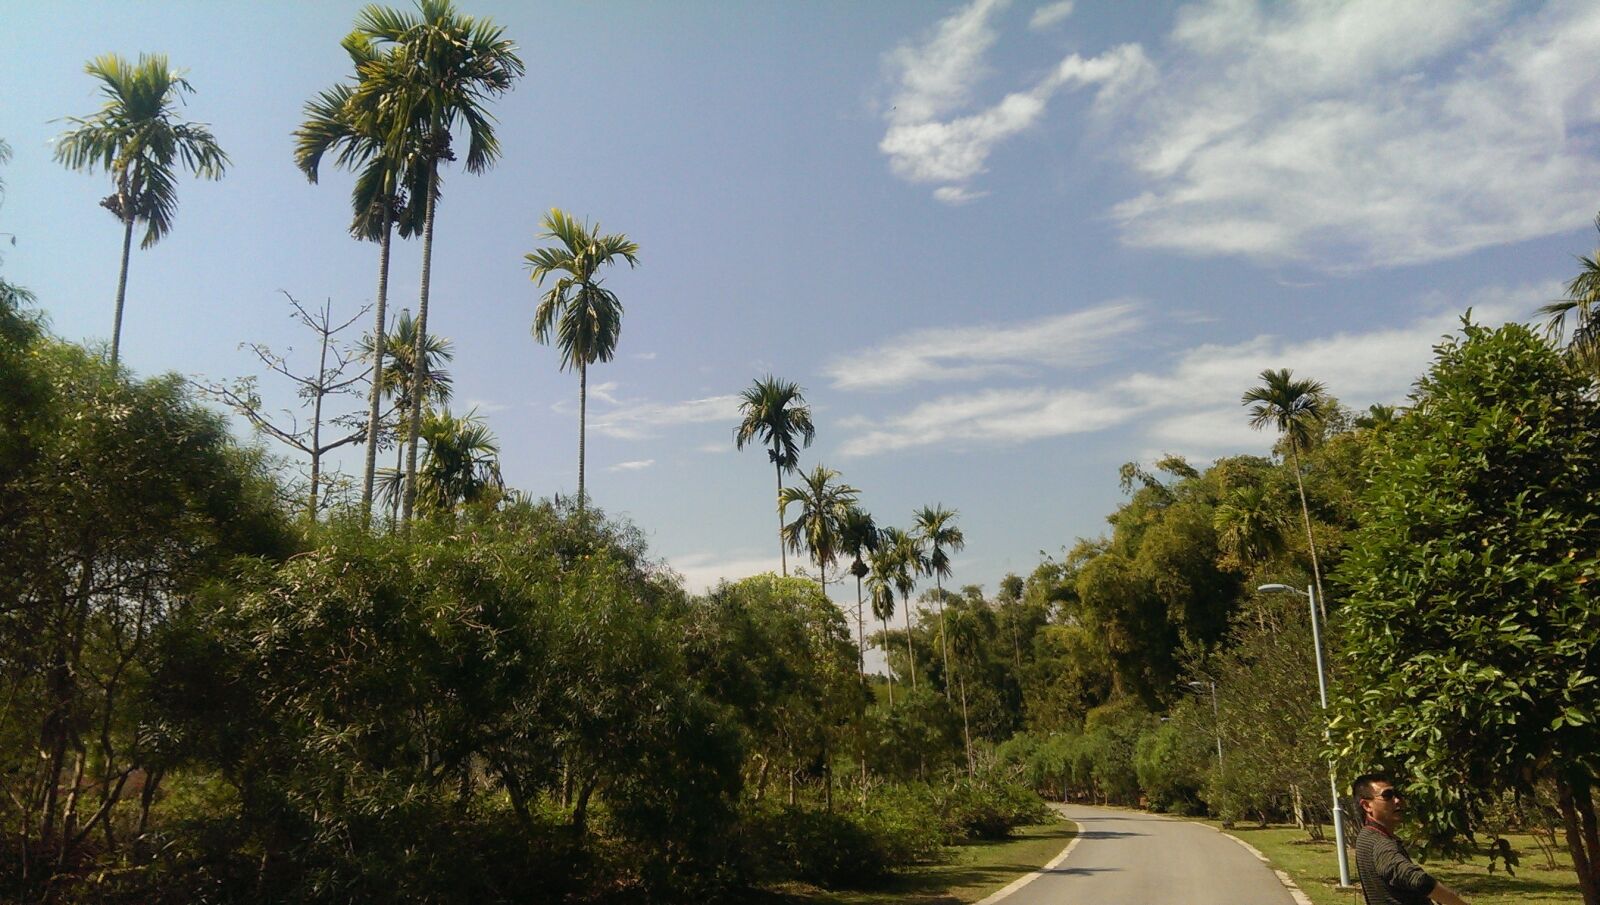 HTC ONE sample photo. In yunnan province, botanical photography